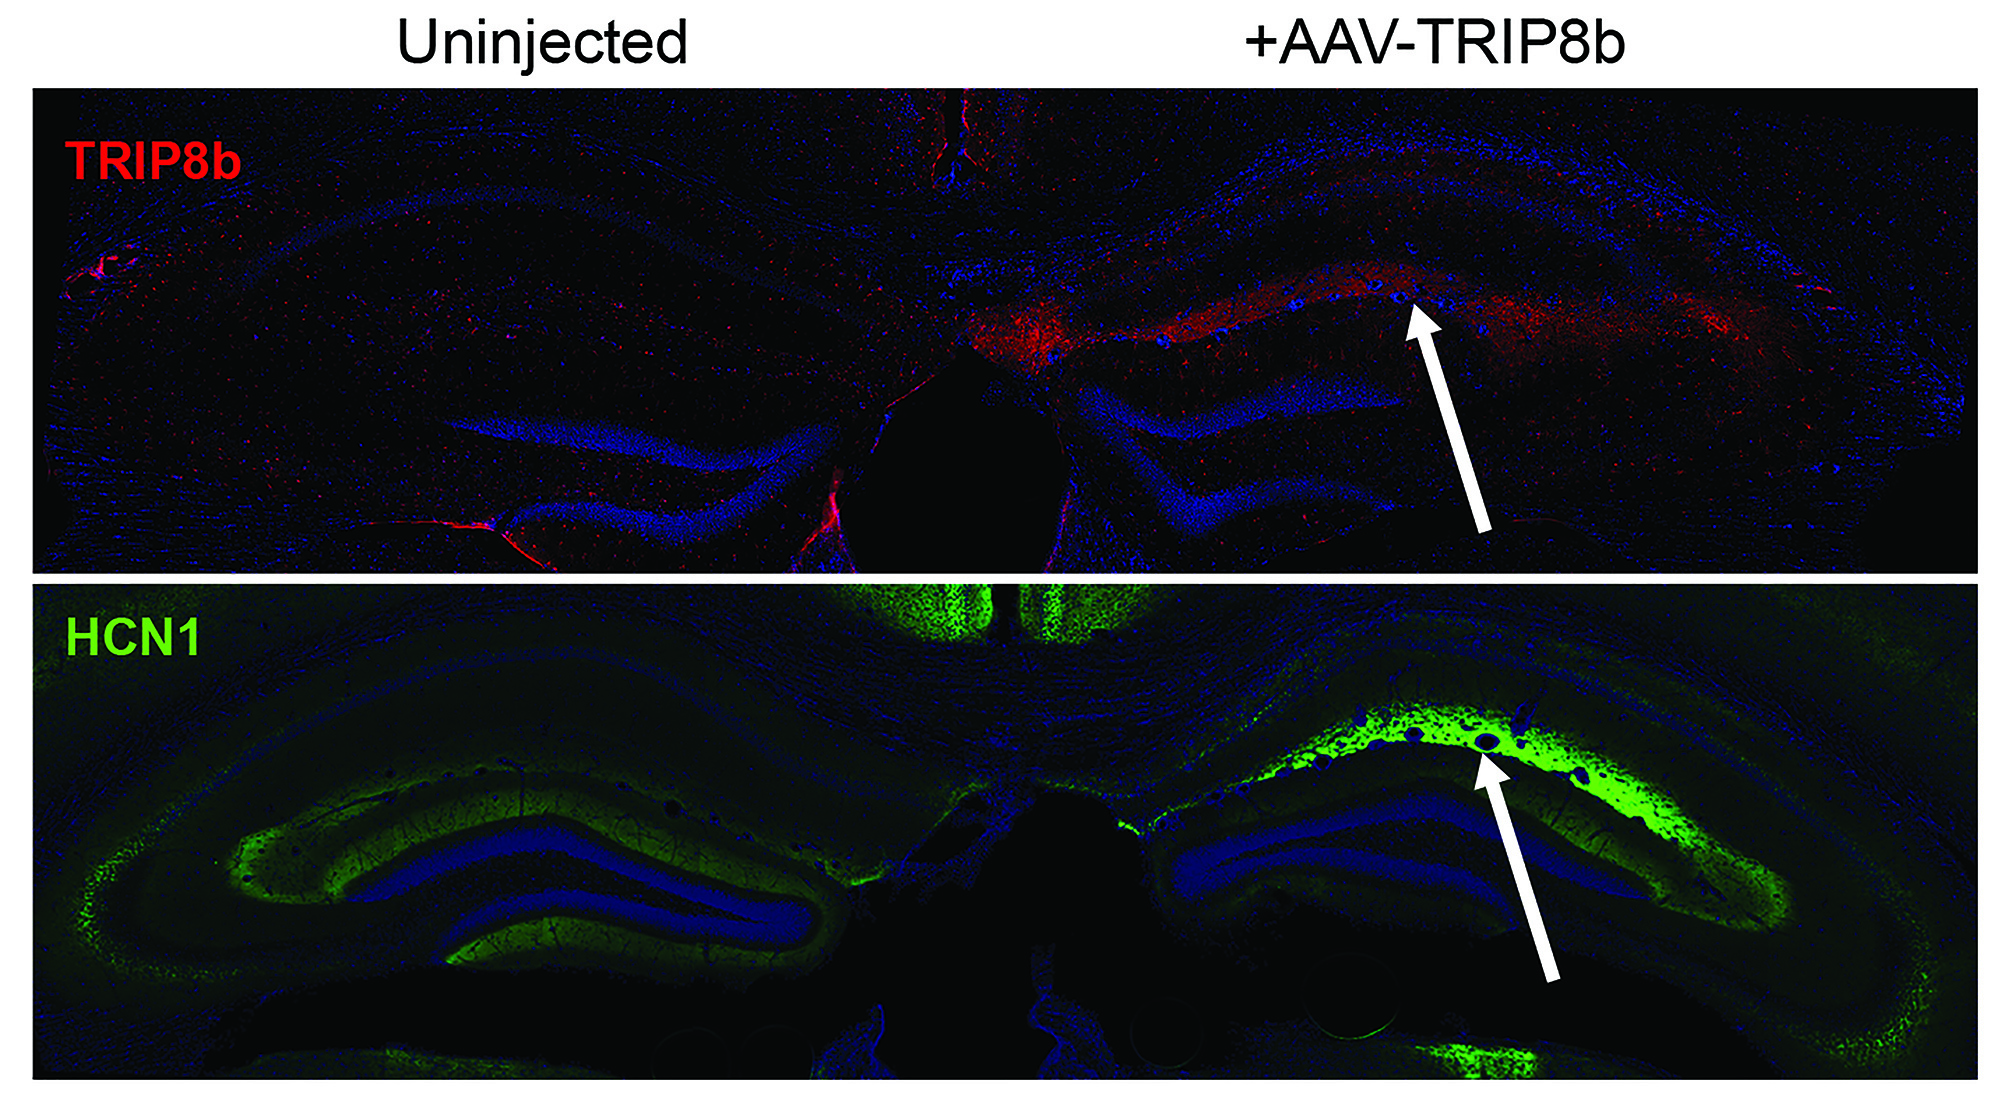 Microscopic images of brain sections from a mouse injected on one side with a virus engineered to increase the expression of HCN channel proteins (TRIP8b and HCN1). The fluorescent signal corresponding to HCN channel proteins is much higher in the injected hippocampus (arrows) compared to the uninjected side. 